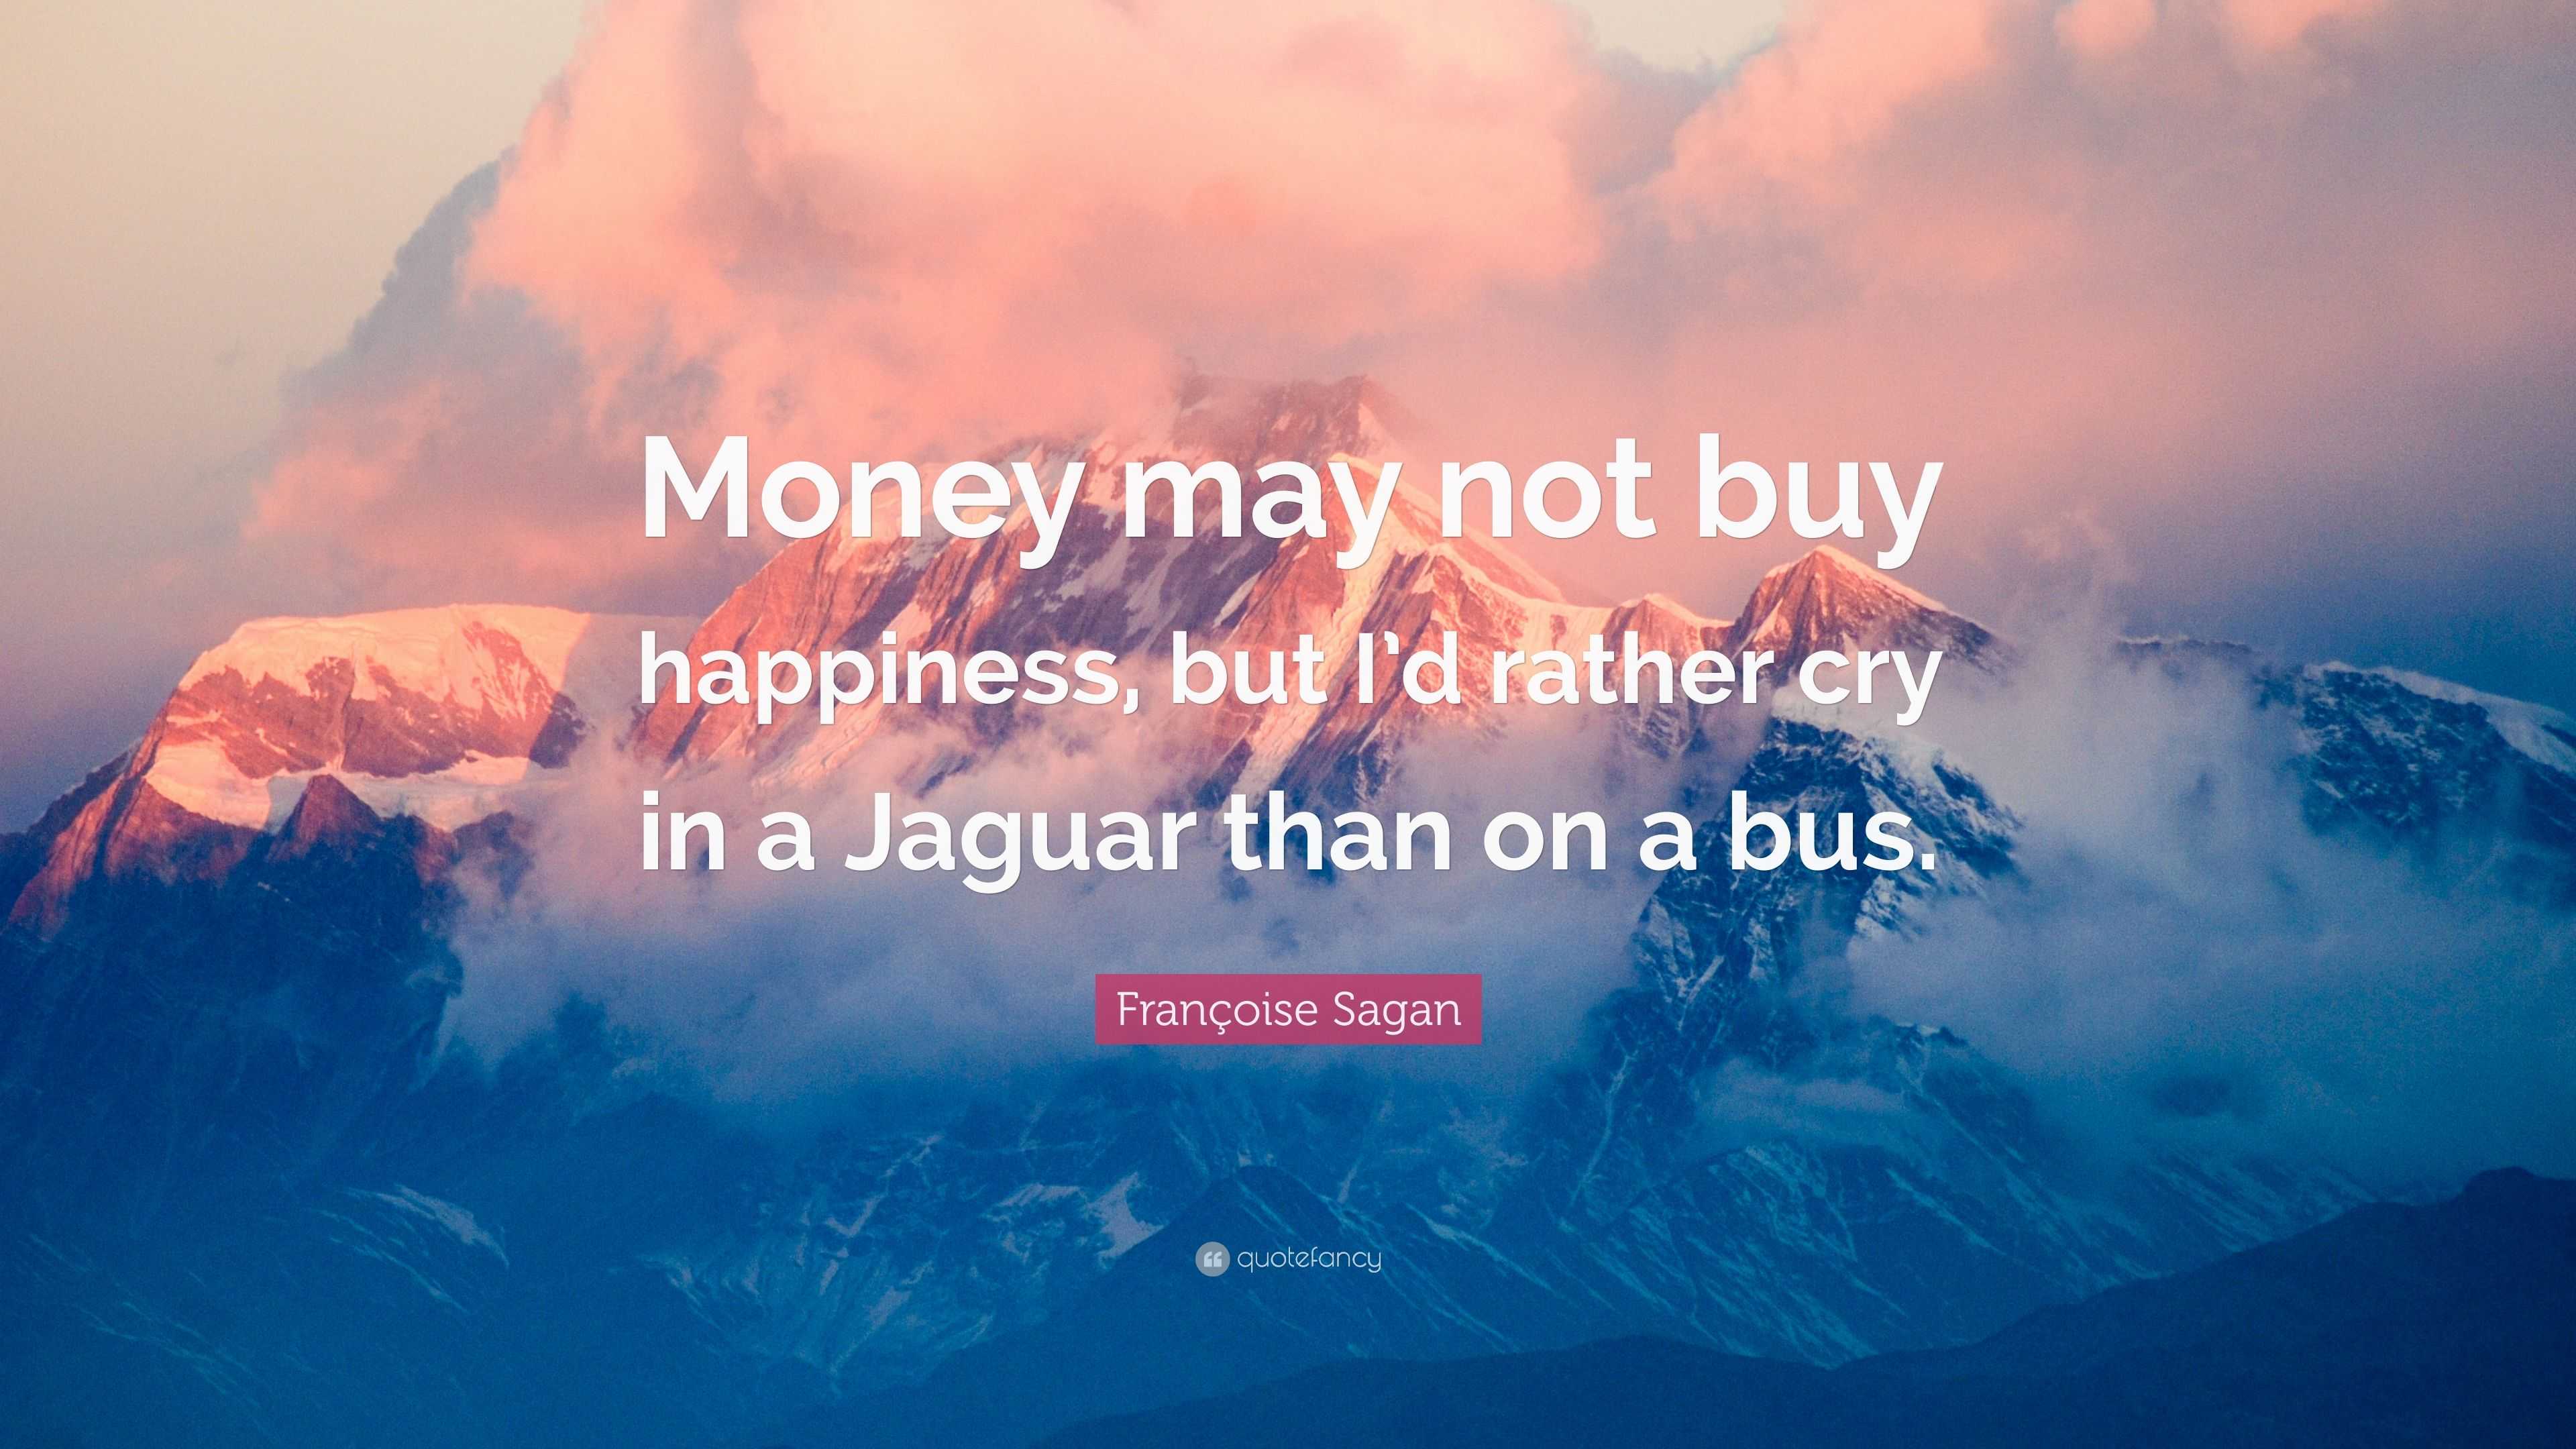 Françoise Sagan Quote: "Money may not buy happiness, but I'd rather cry in a Jaguar than on a ...